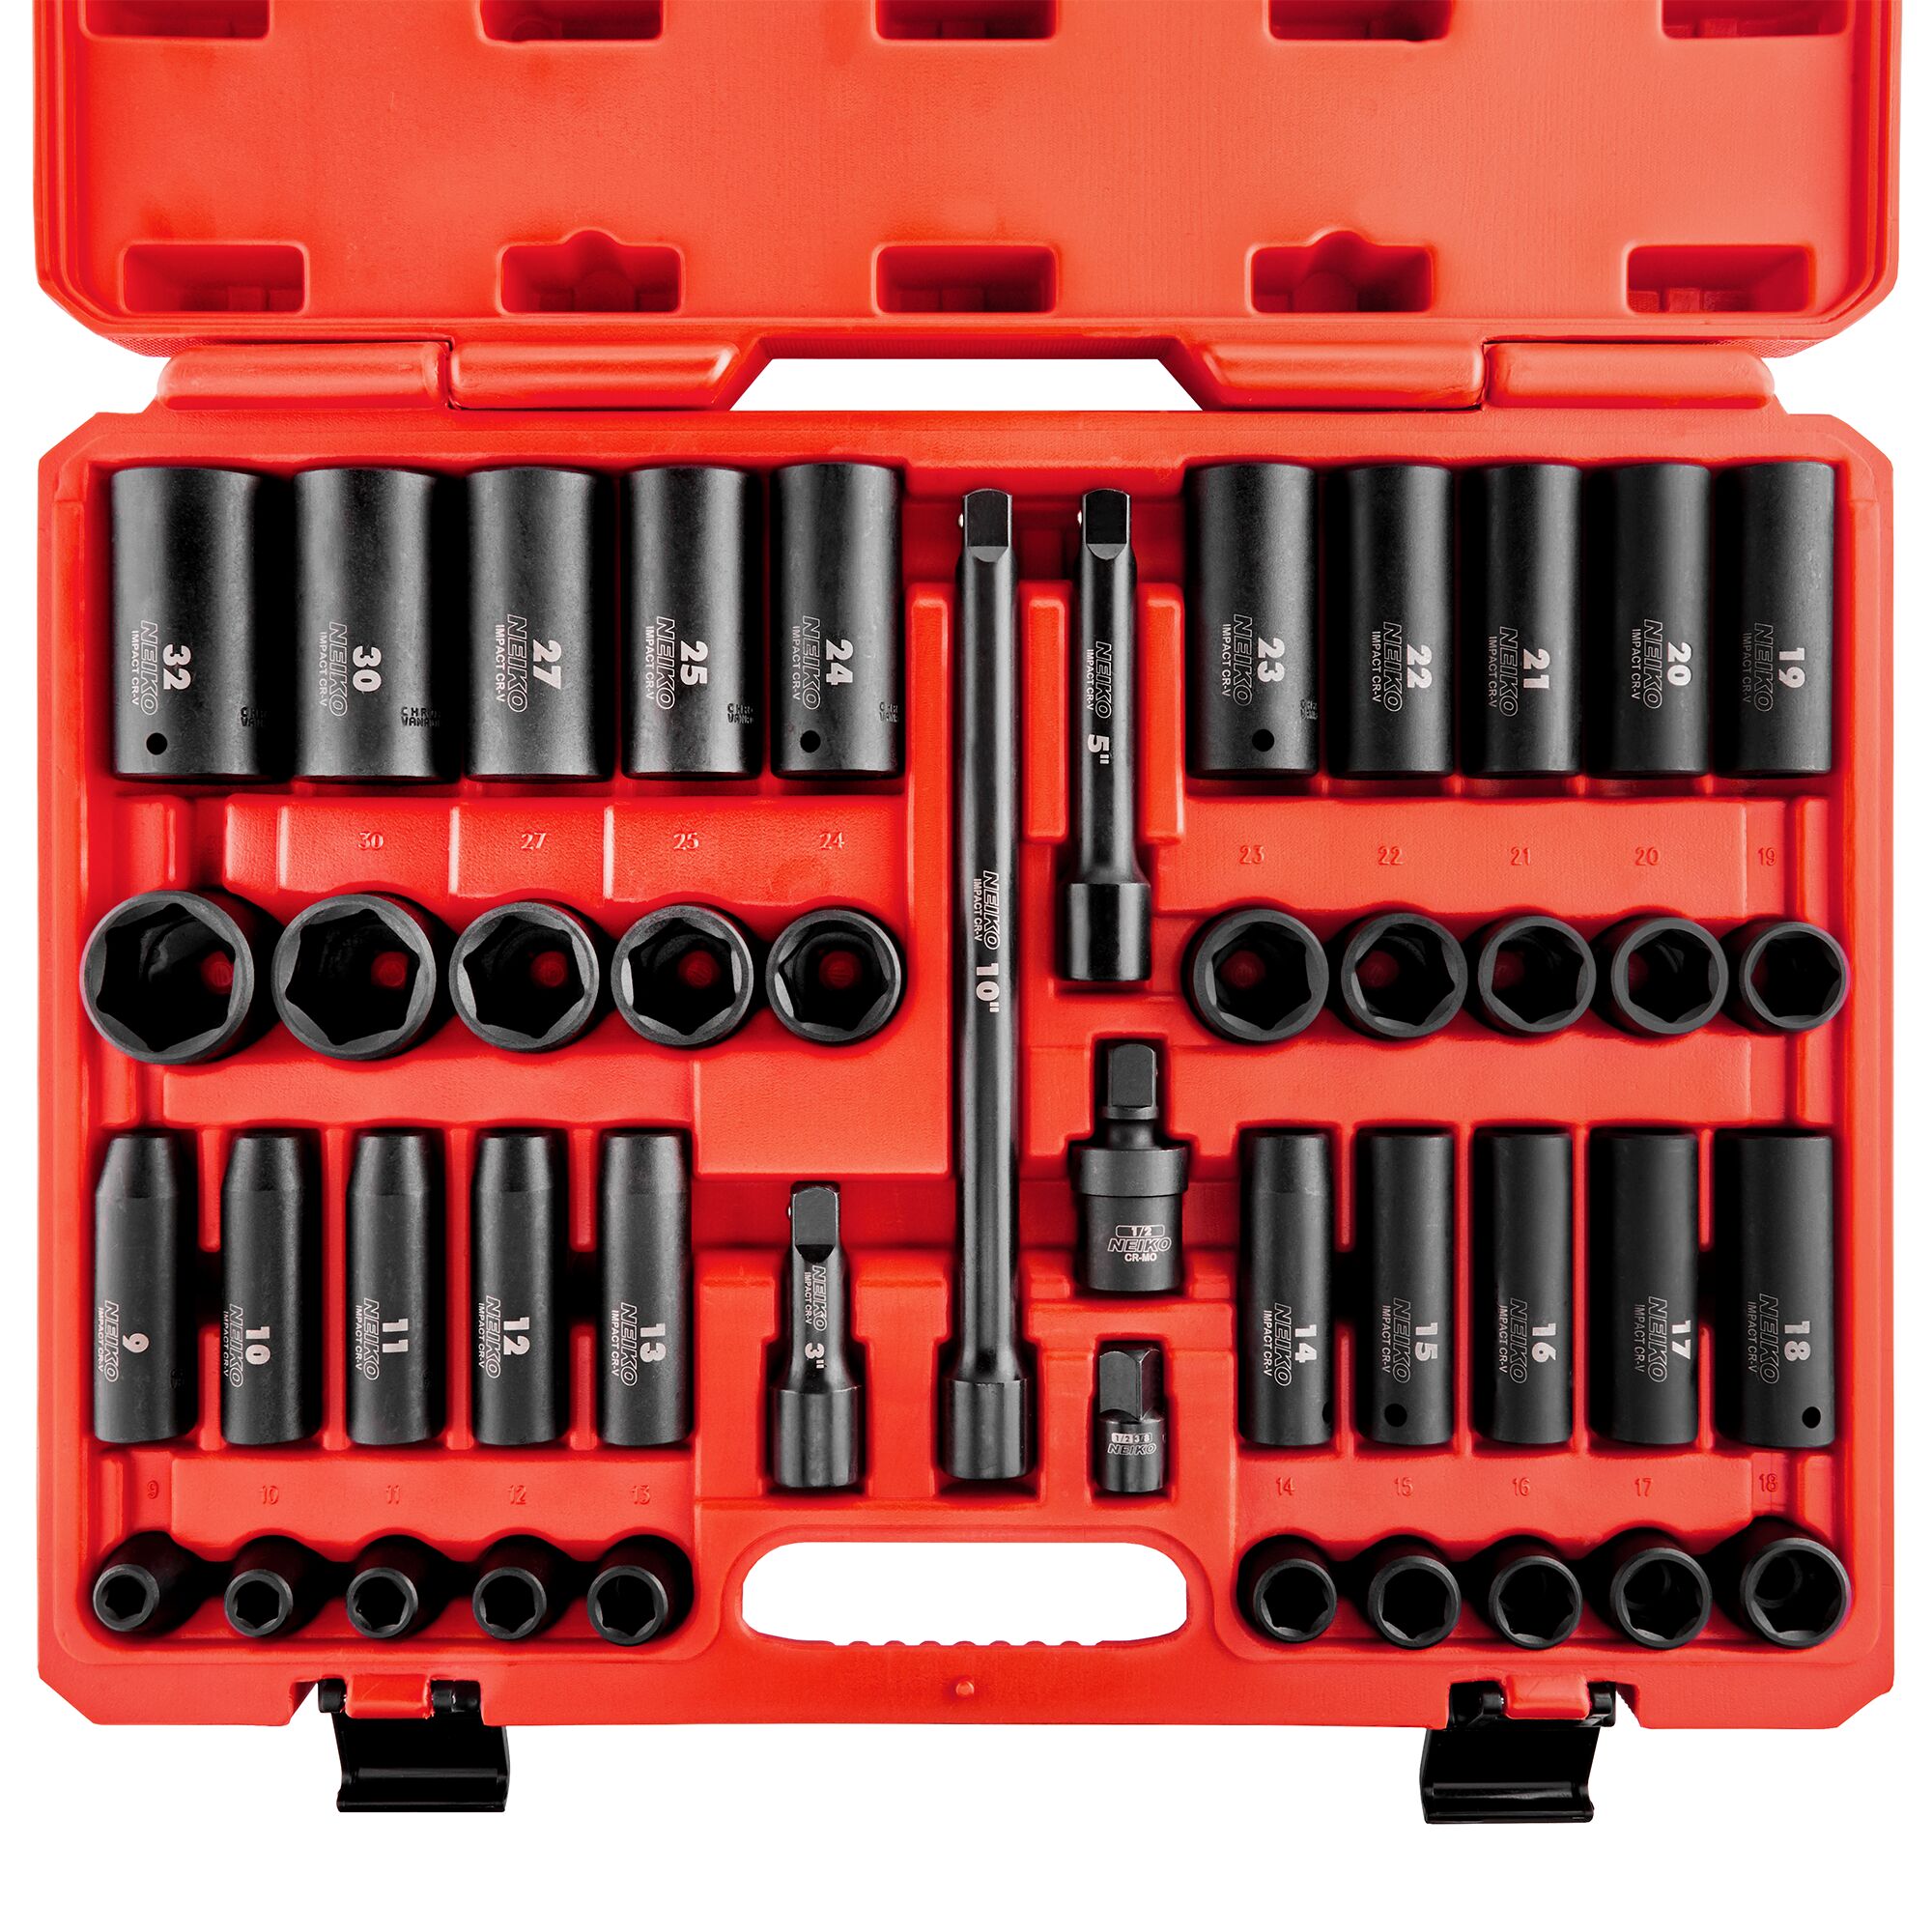 NEIKO Metric 1/2-in Drive Set 6-point Impact Socket Set in the